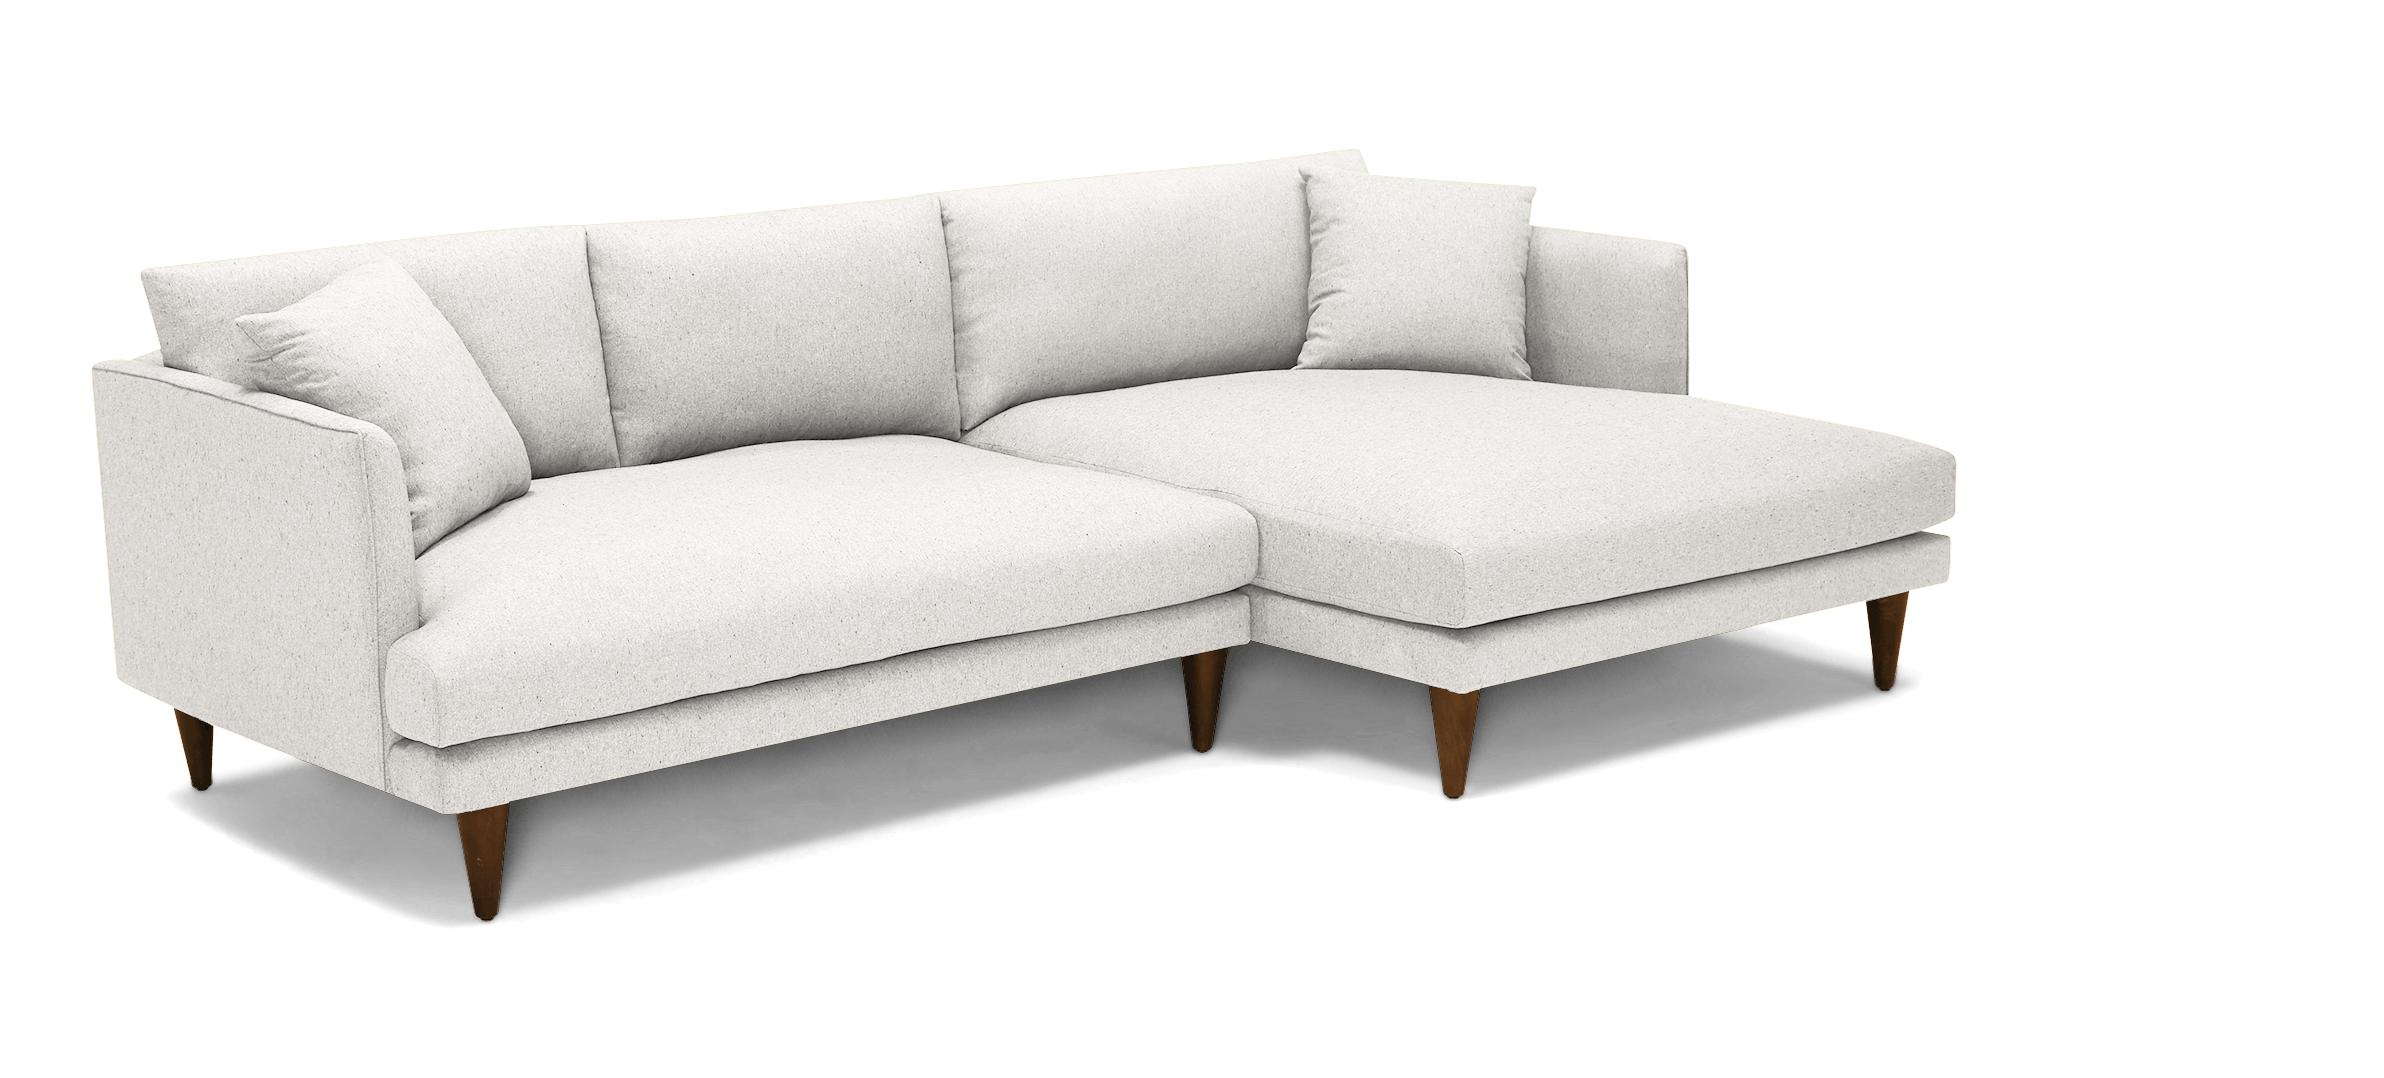 White Lewis Mid Century Modern Sectional - Tussah Snow - Mocha - Right - Cone - Image 1